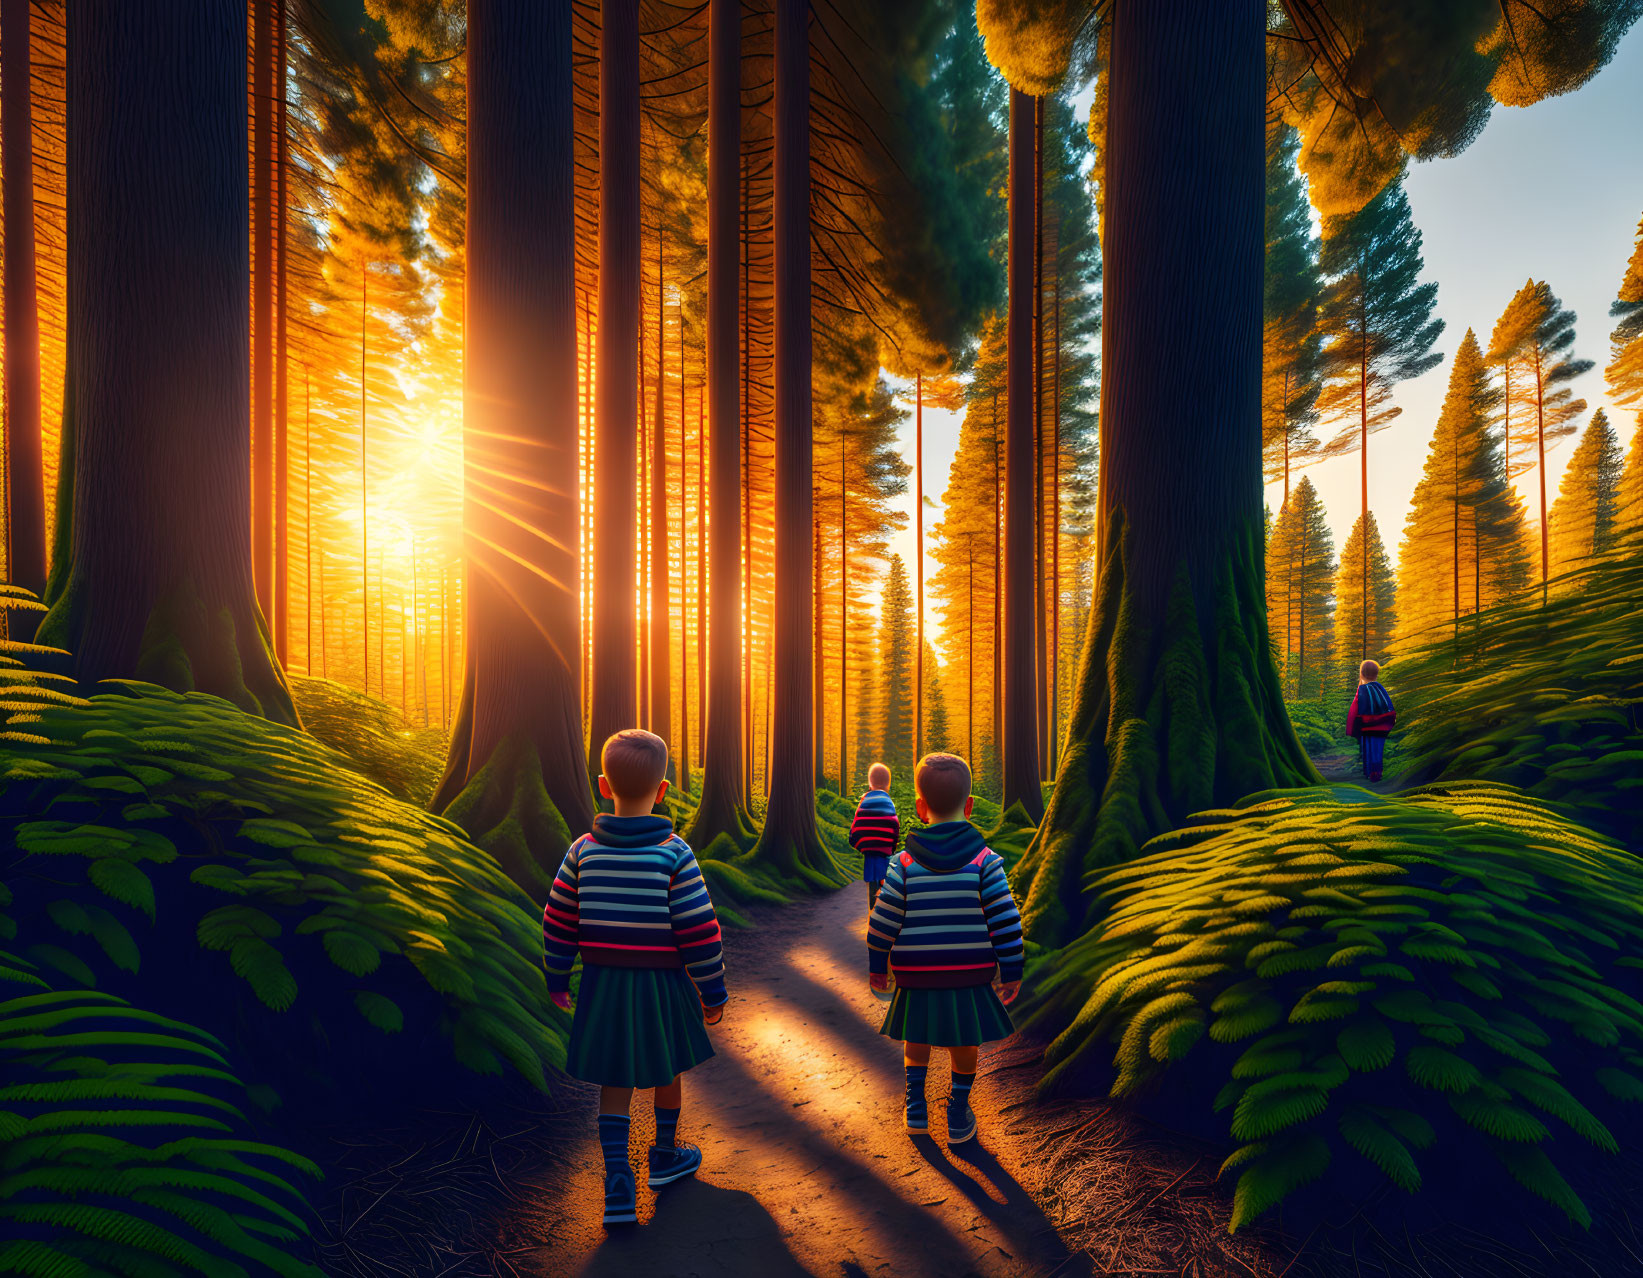 Children walking on forest path with sunlight filtering through trees.